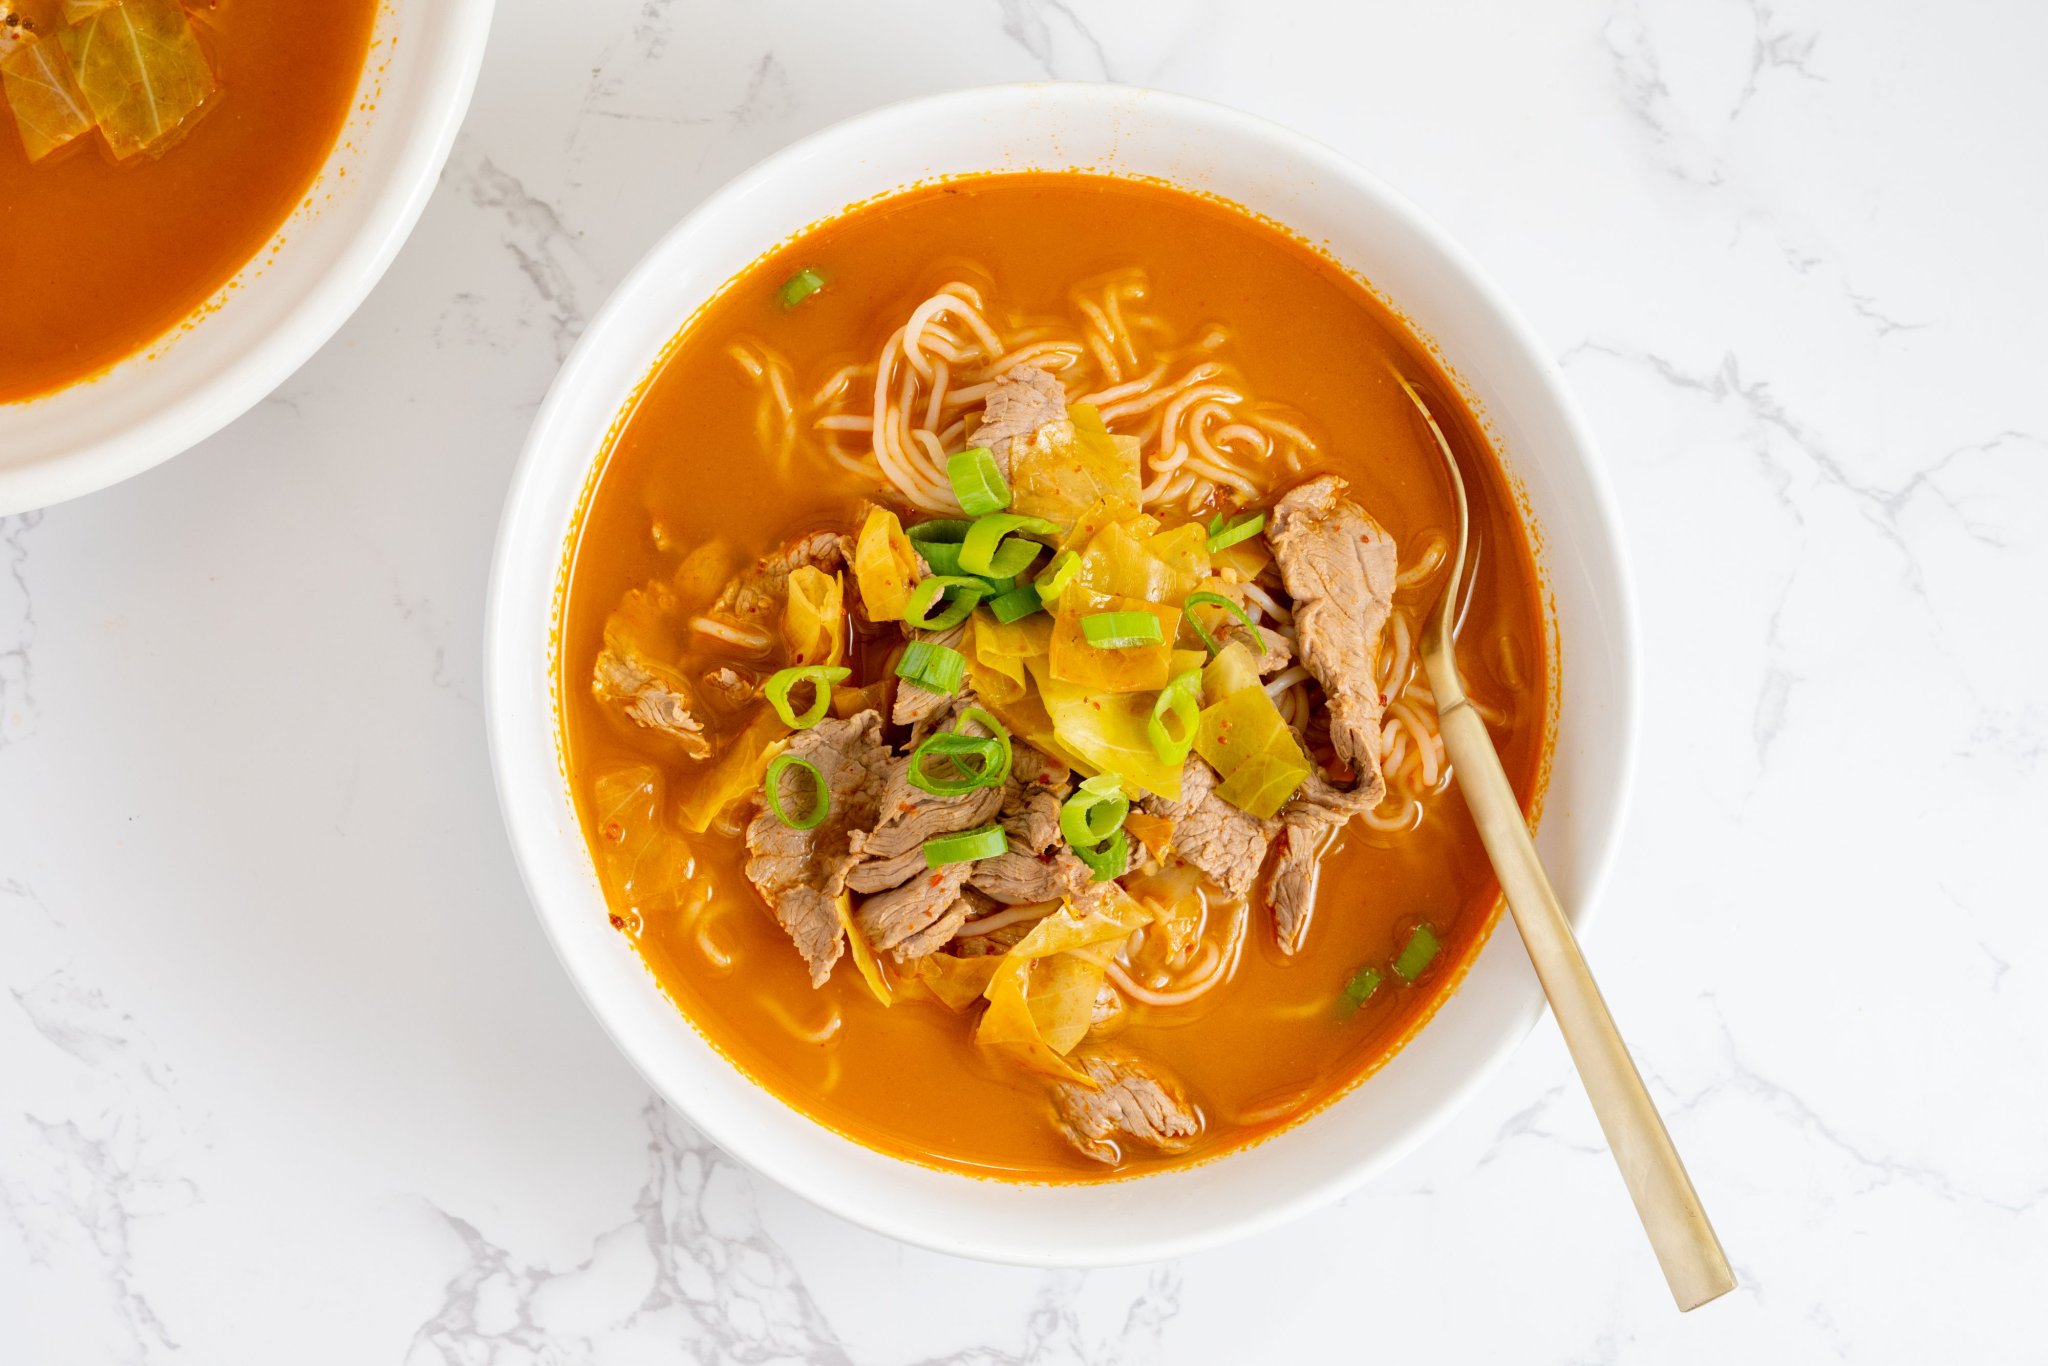 This Korean Spicy Noodle Soup Recipe Will Help Keep You Warm